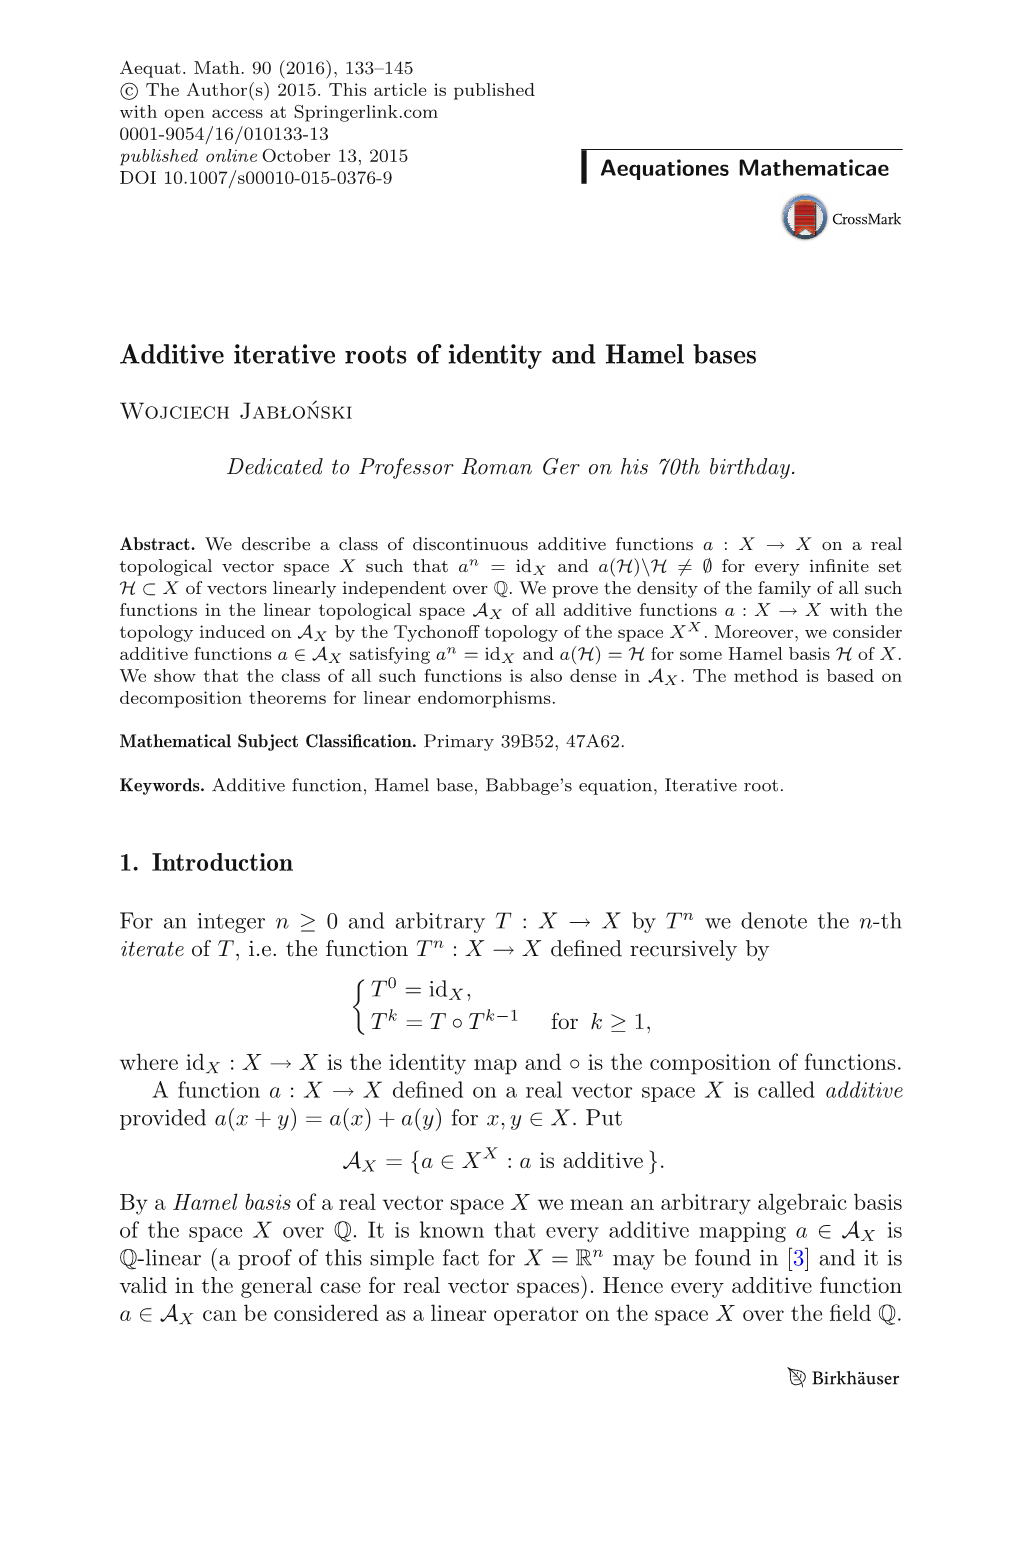 Additive Iterative Roots of Identity and Hamel Bases